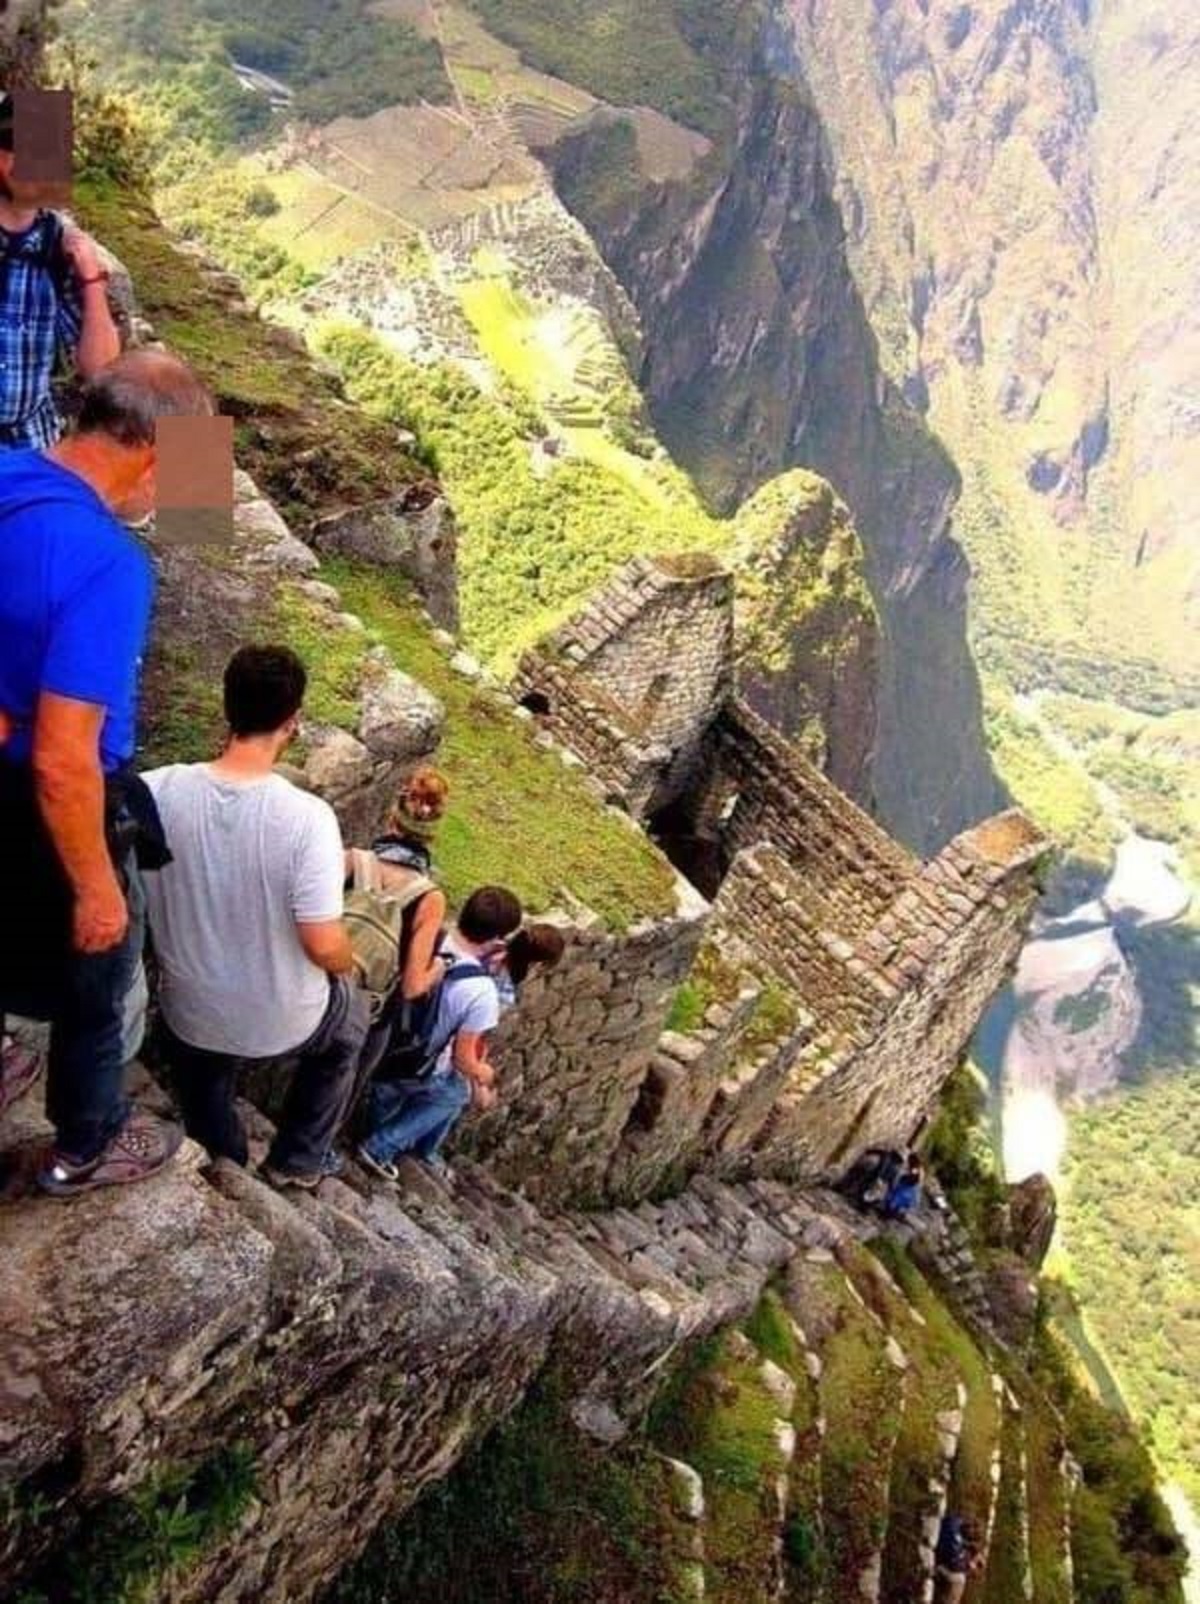 These are the "Stairs of Death," an extremely steep staircase located in Peru's Huayna Picchu: